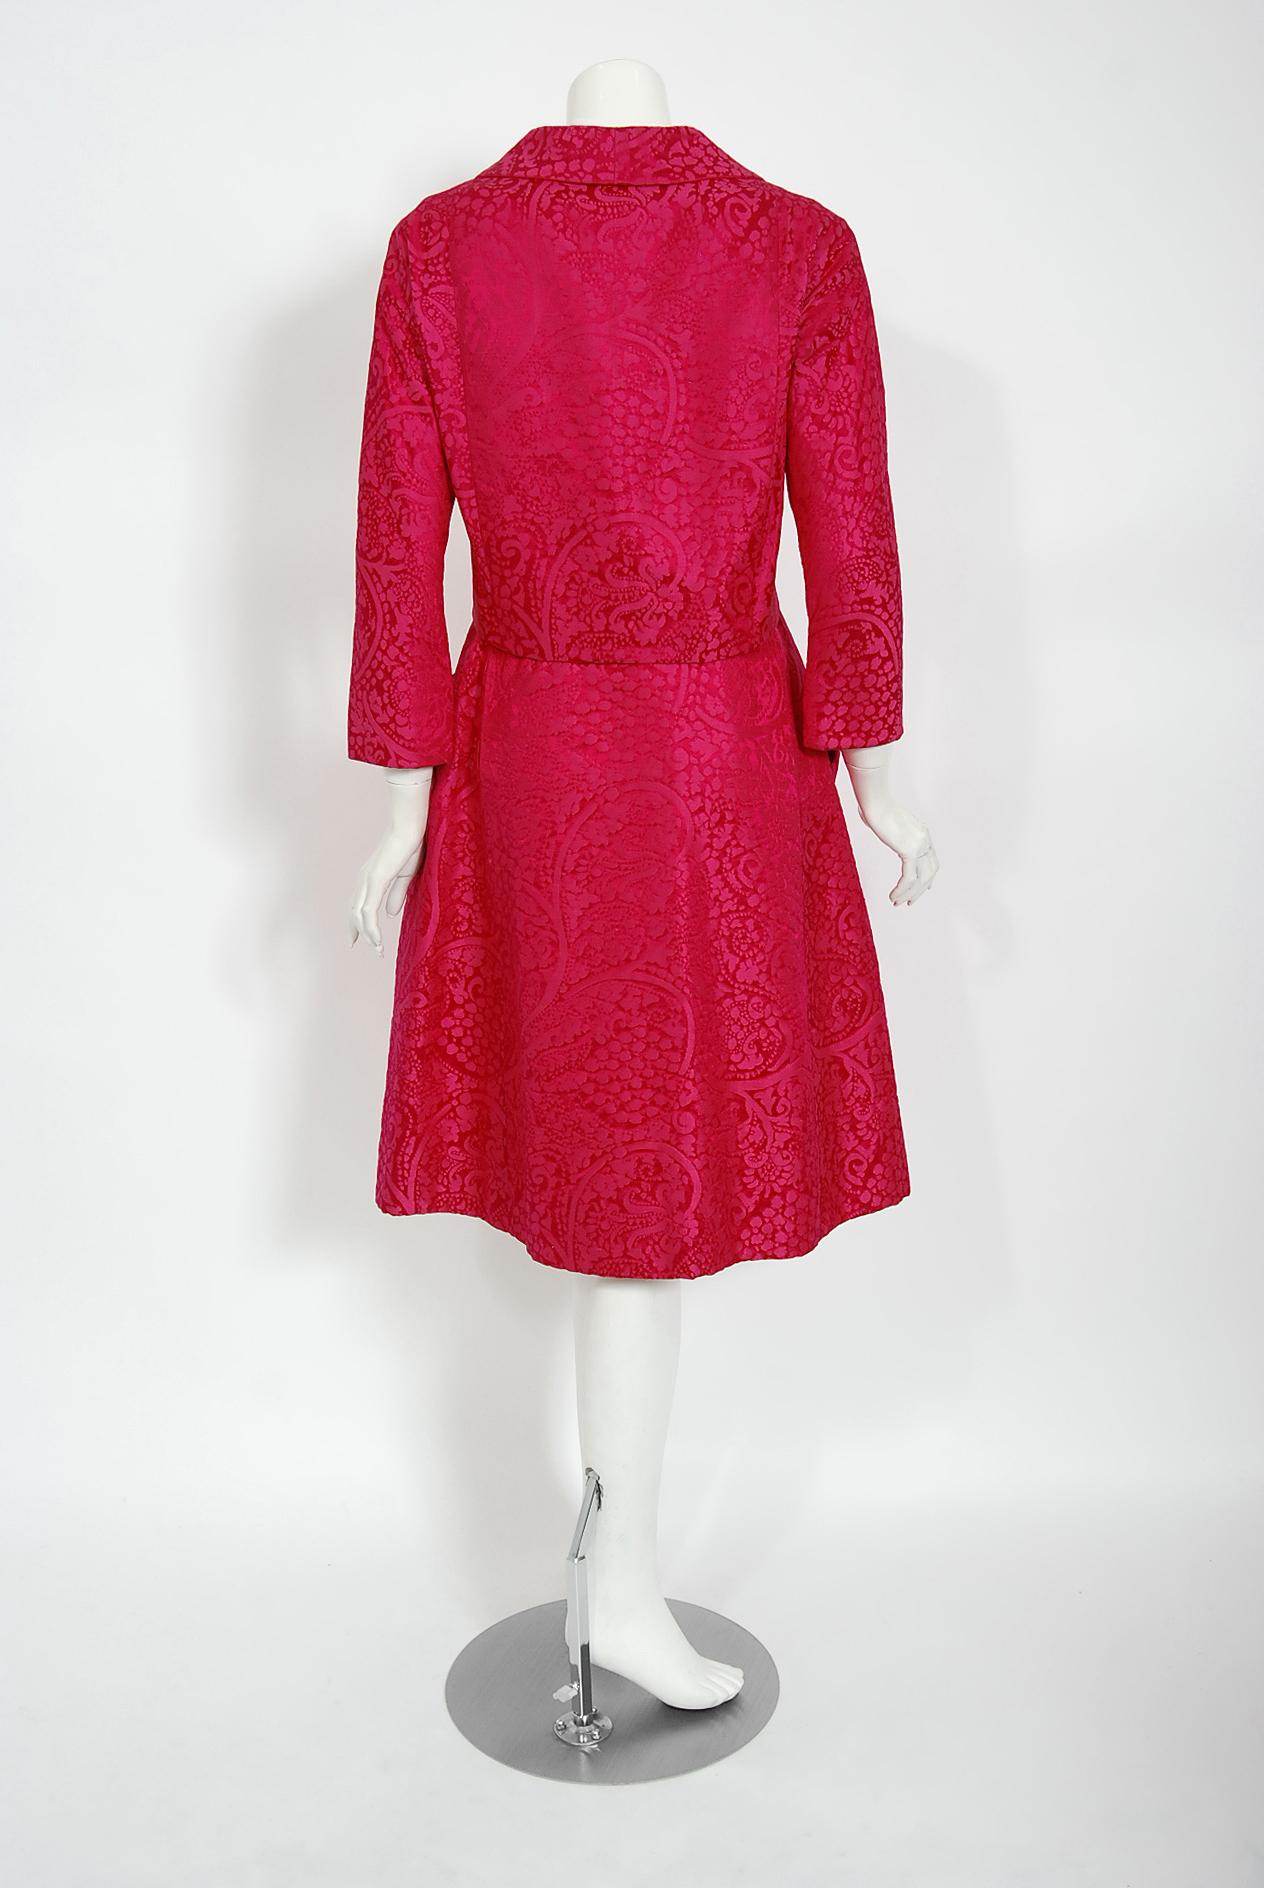 Vintage 1962 Christian Dior Haute Couture Pink Textured Silk Dress & Bow Jacket 3